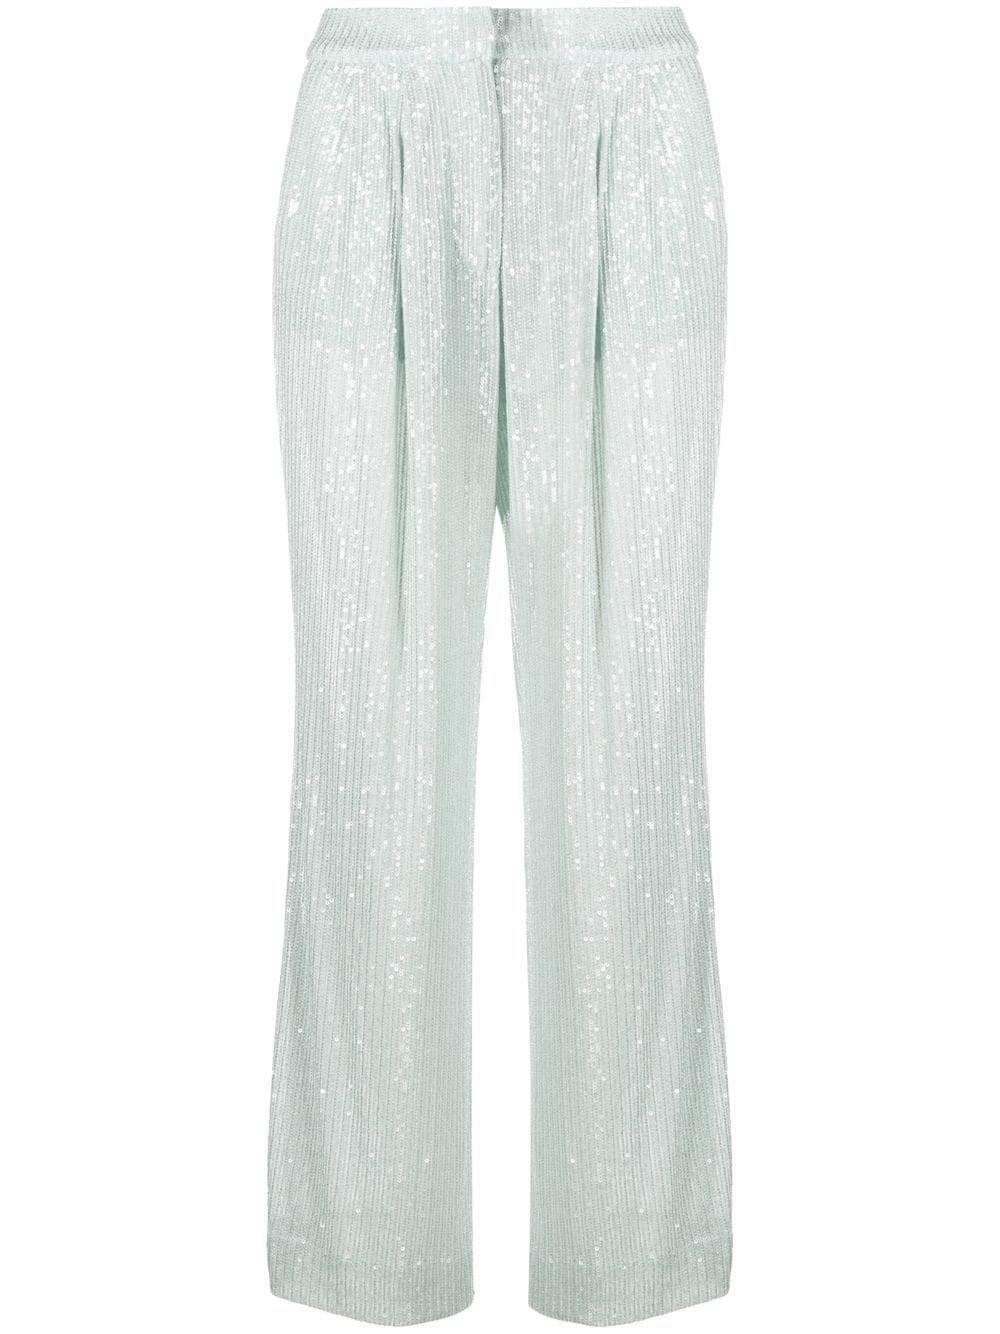 ROTATE BIRGER CHRISTENSEN SEQUINED TROUSERS